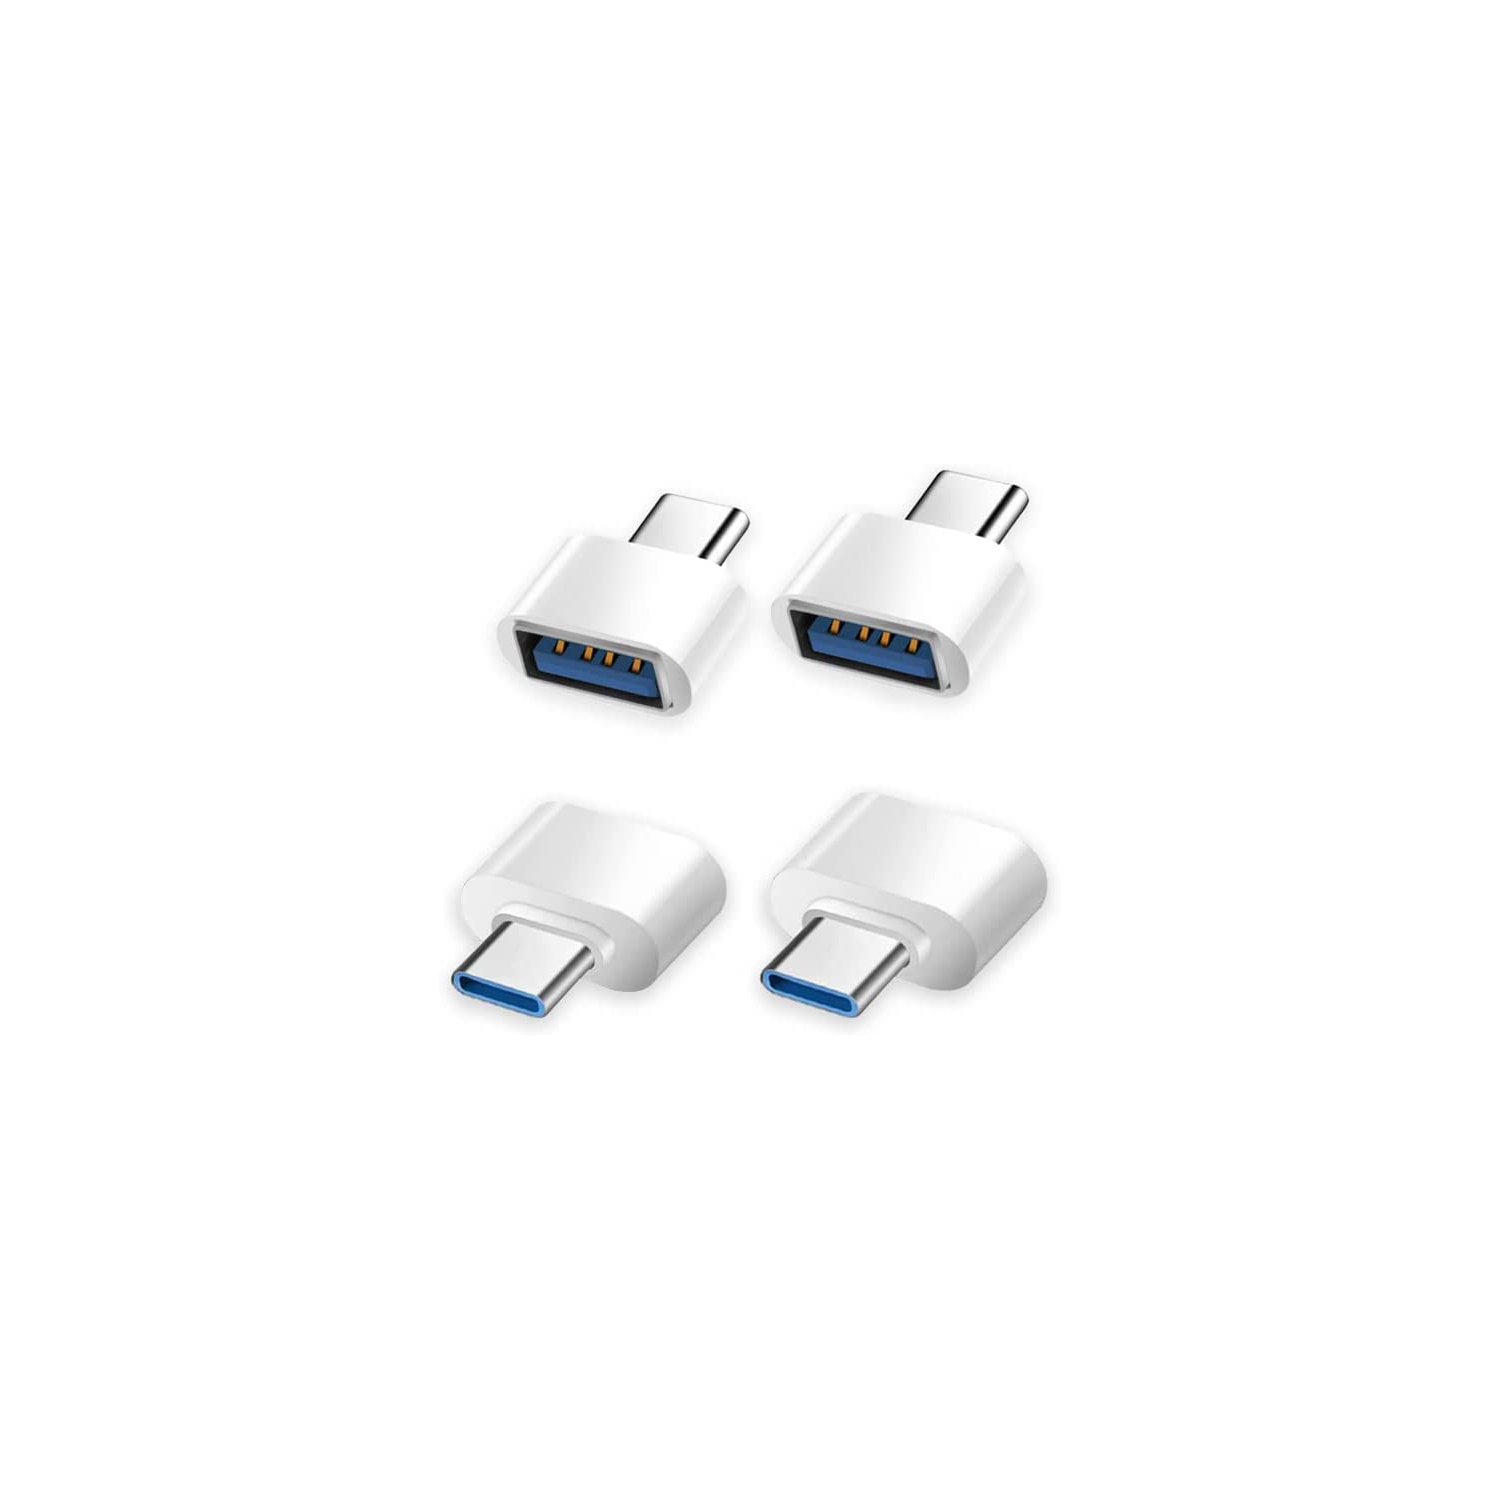 USB A to USB C FAST CHARGE Adapter Type C Charger Plug Power Converter for Watch iWatch AirPods iPhone 11 12 13 Max iPad Mini Air 4 5 Samsung Galaxy S20 S21 S22 Plus Ultra (2PACK)